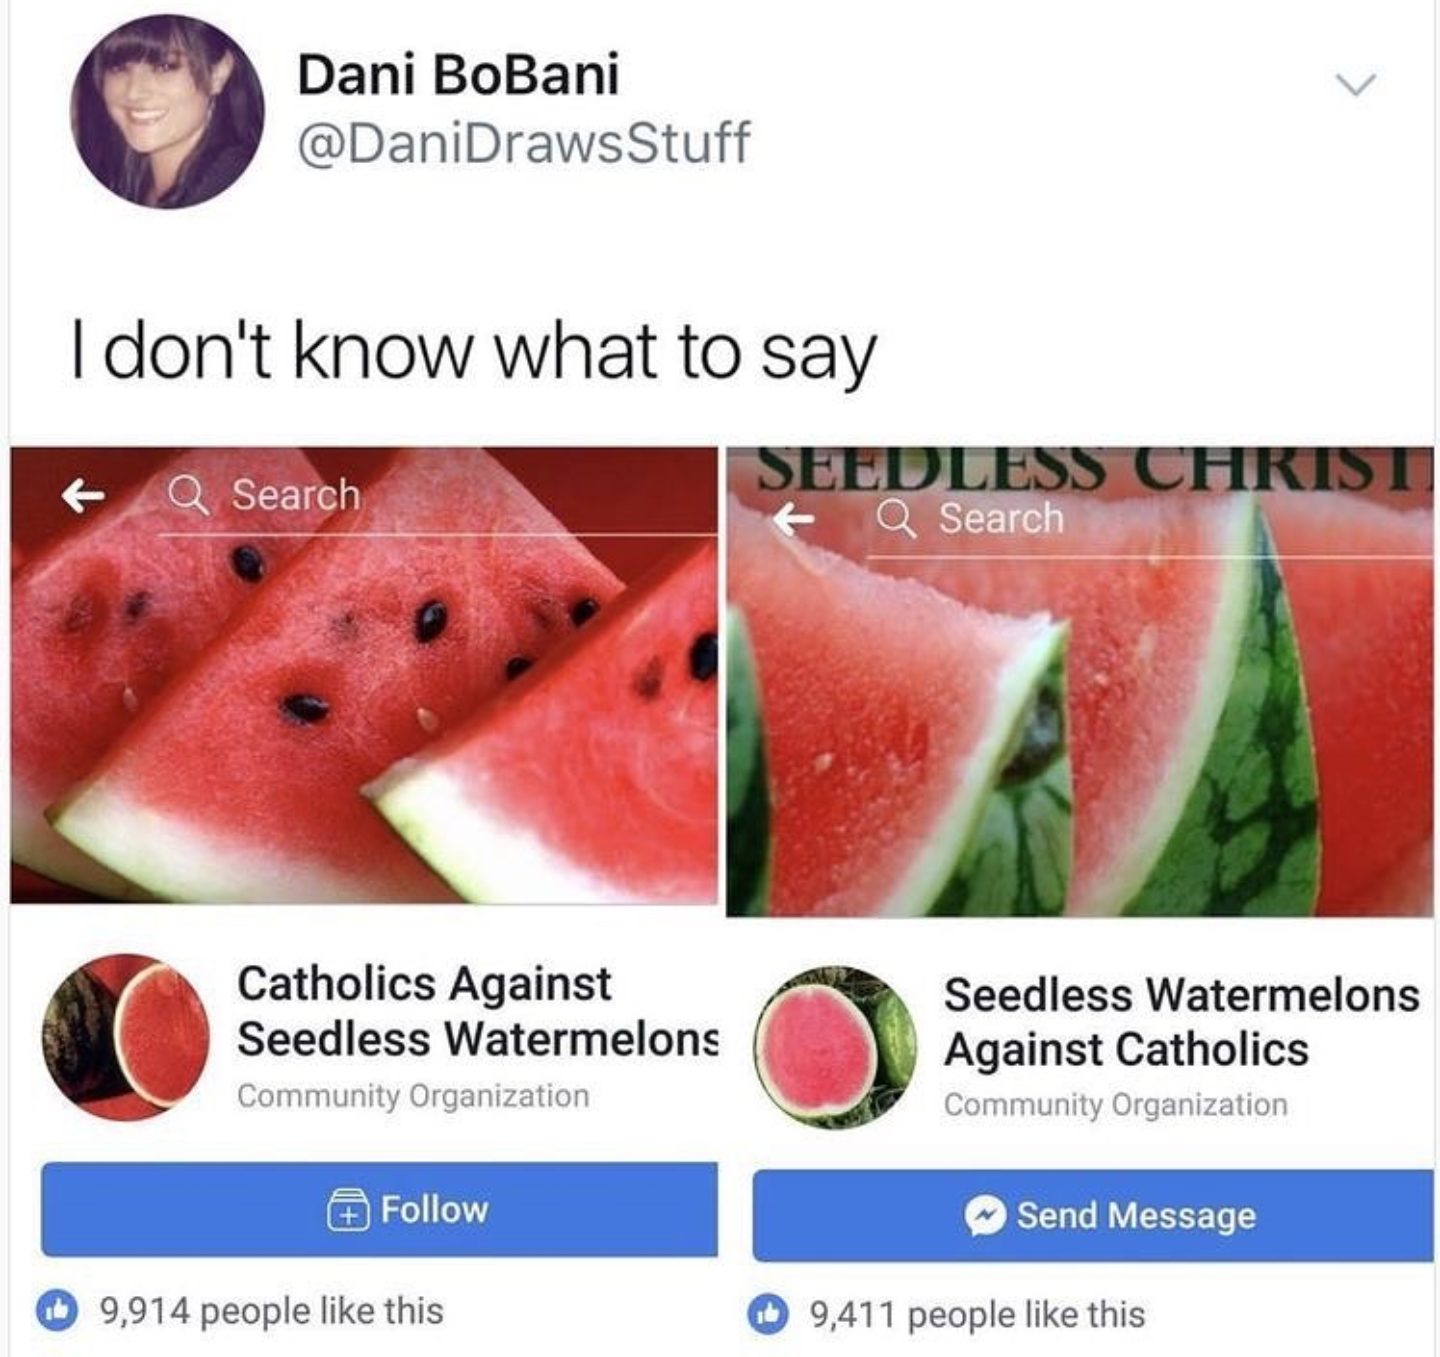 catholics against seedless watermelon - Dani BoBani I don't know what to say Seedless Christ Q Search Q Search Catholics Against Seedless Watermelons Community Organization Seedless Watermelons Against Catholics Community Organization Send Message 9,914 p